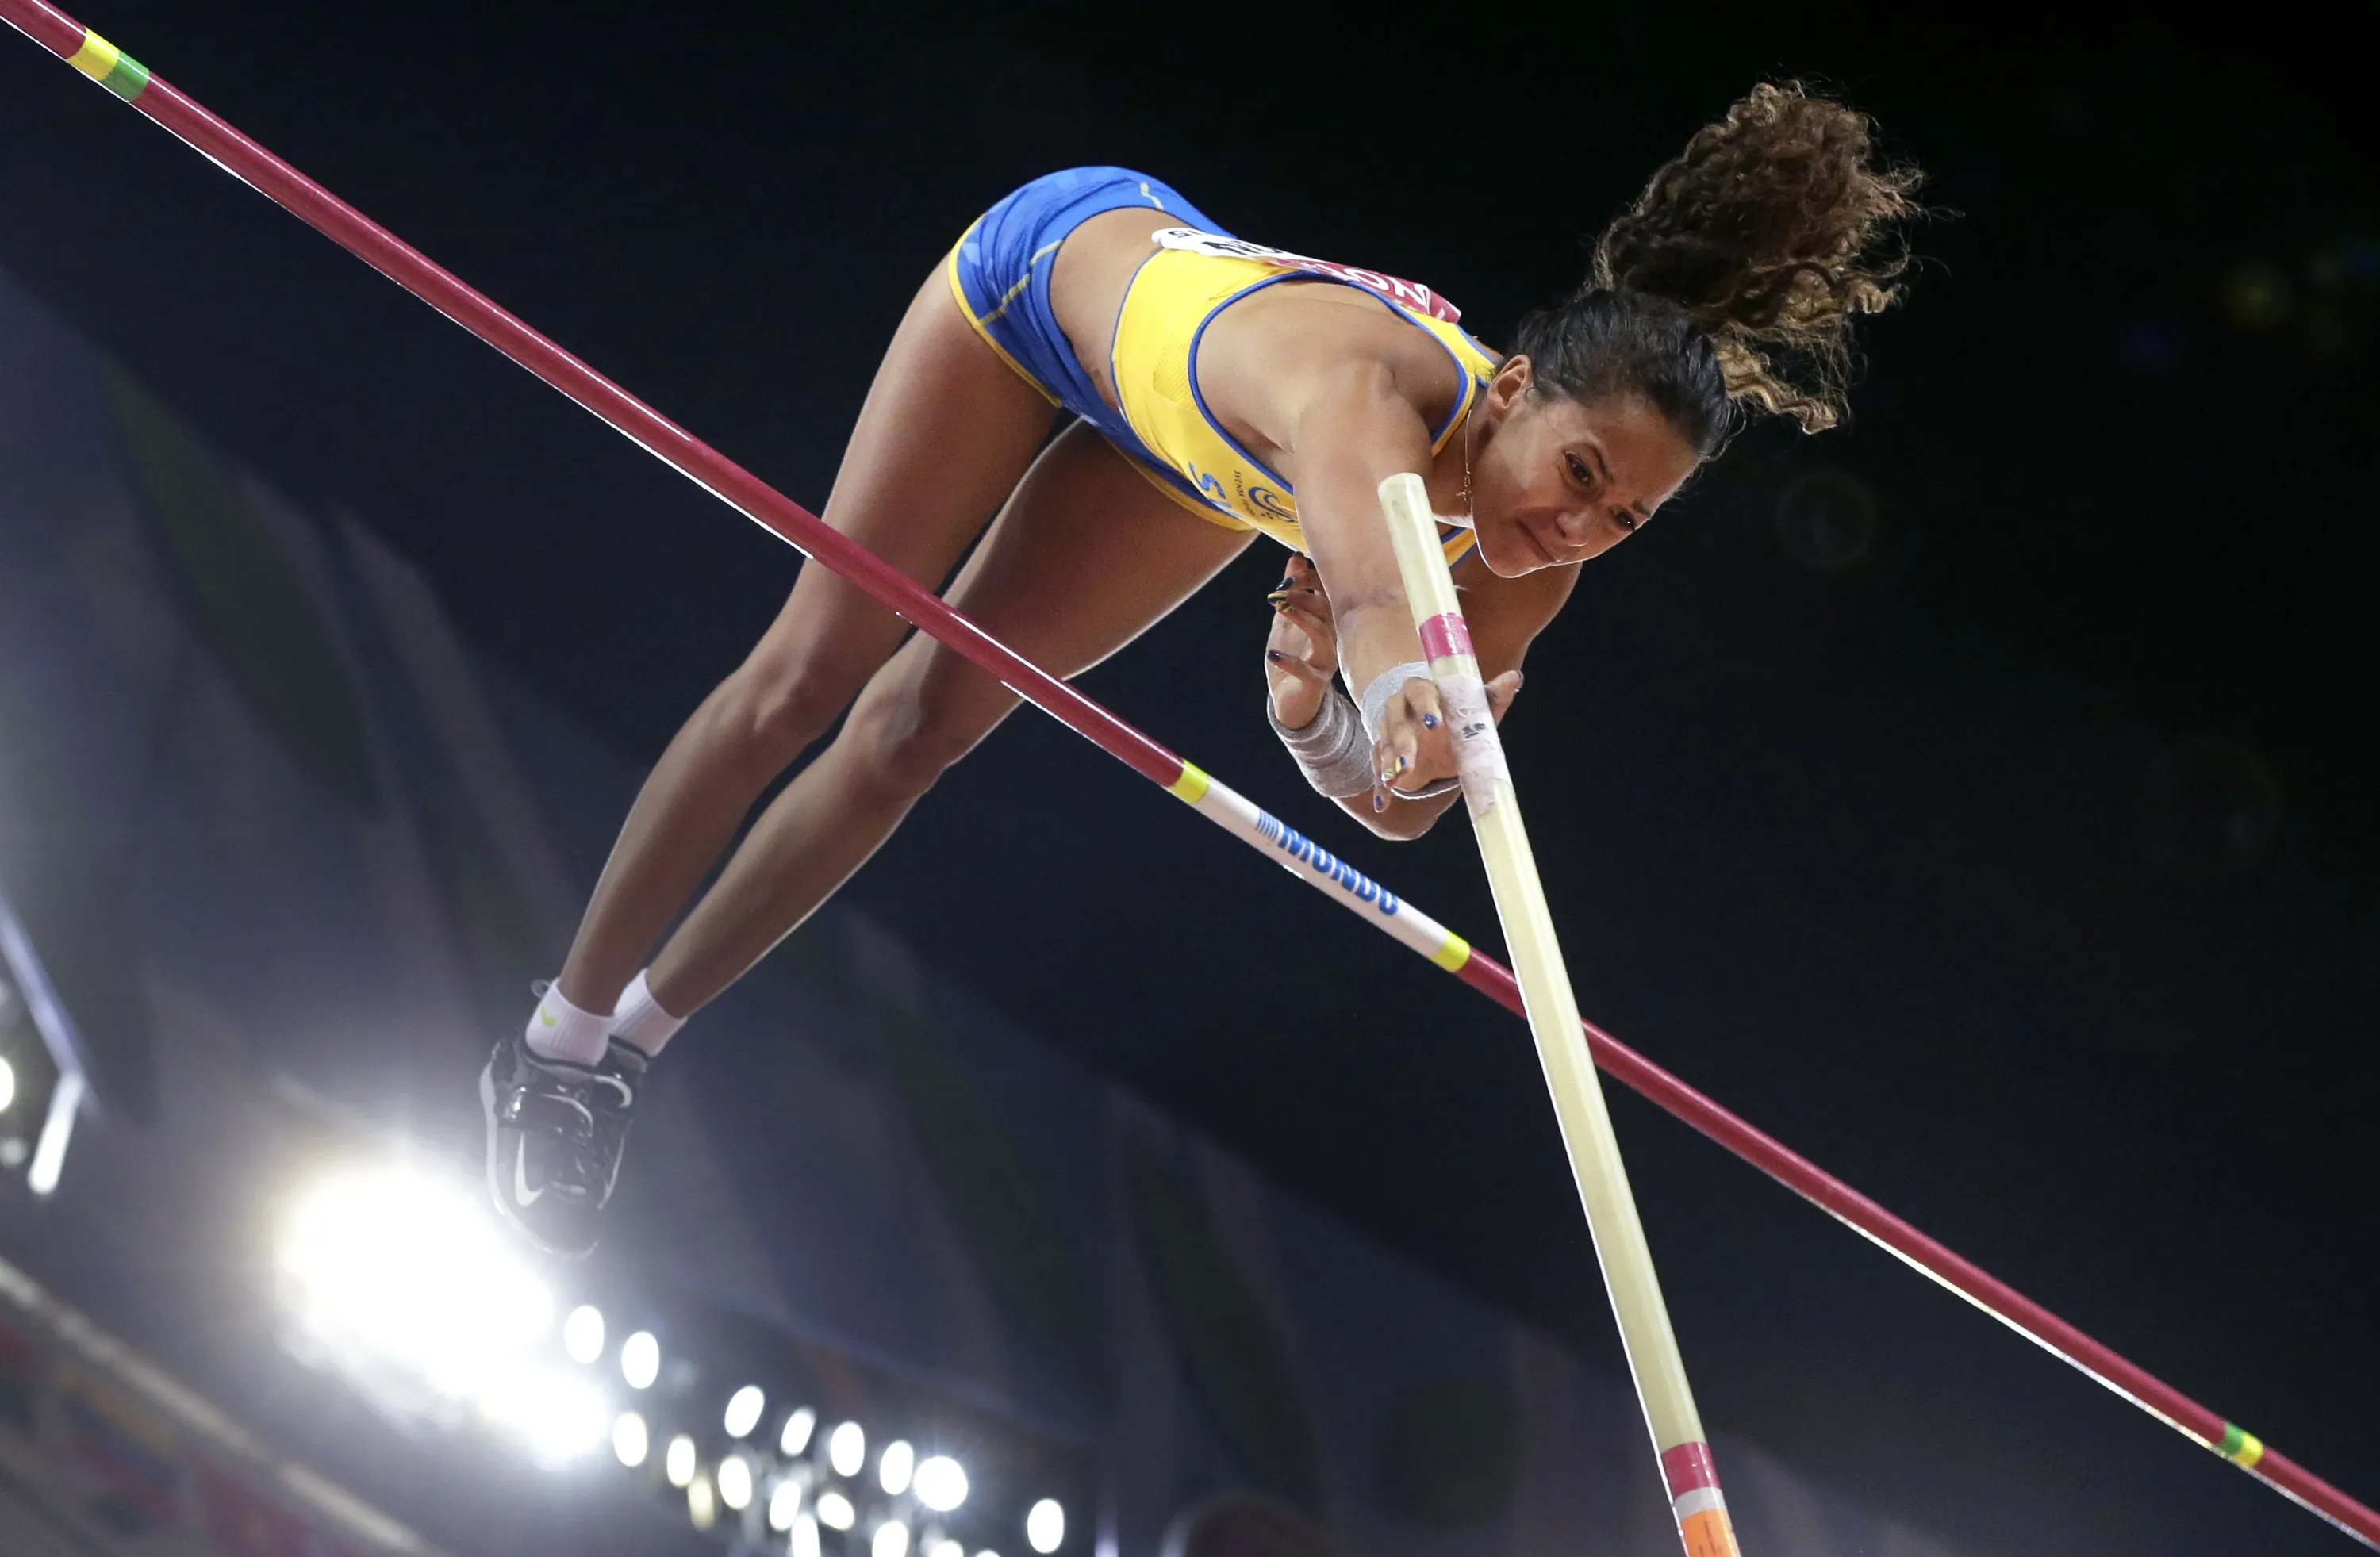 Sweden's Angelica Bengtsson clears the bar during the women's pol...